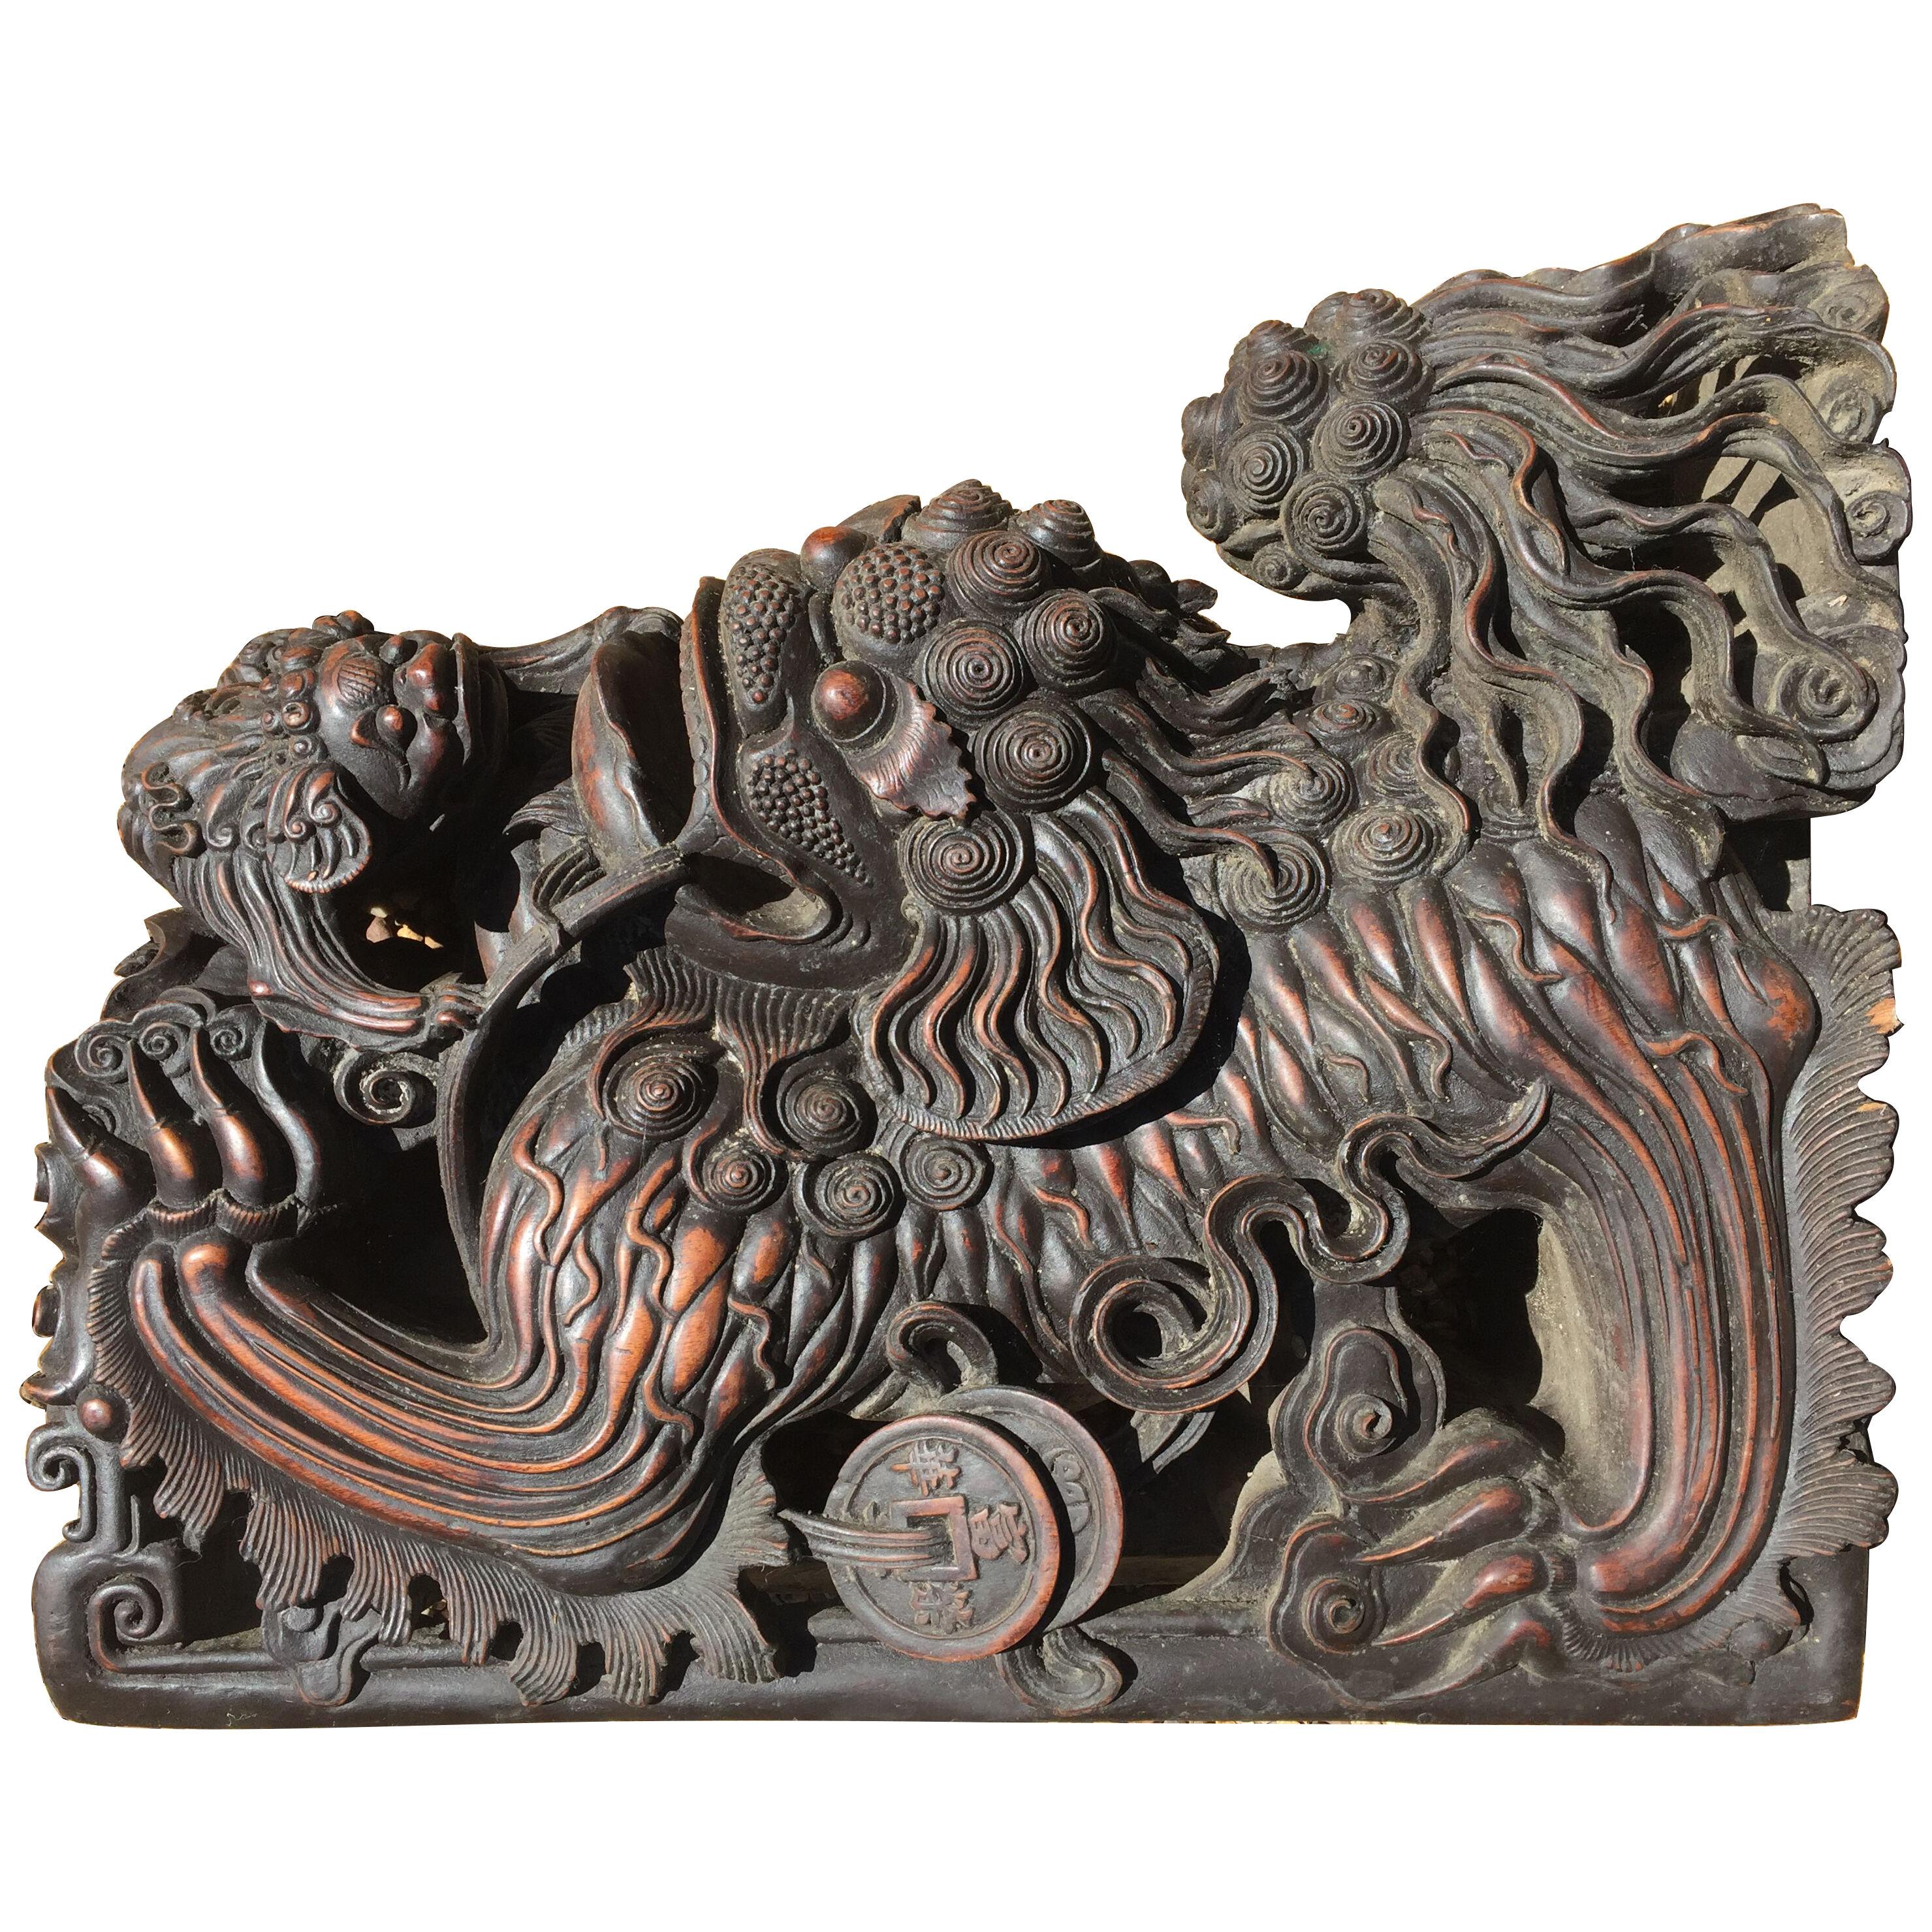 A pair of Qing Dynasty Chinese architectural corbels.